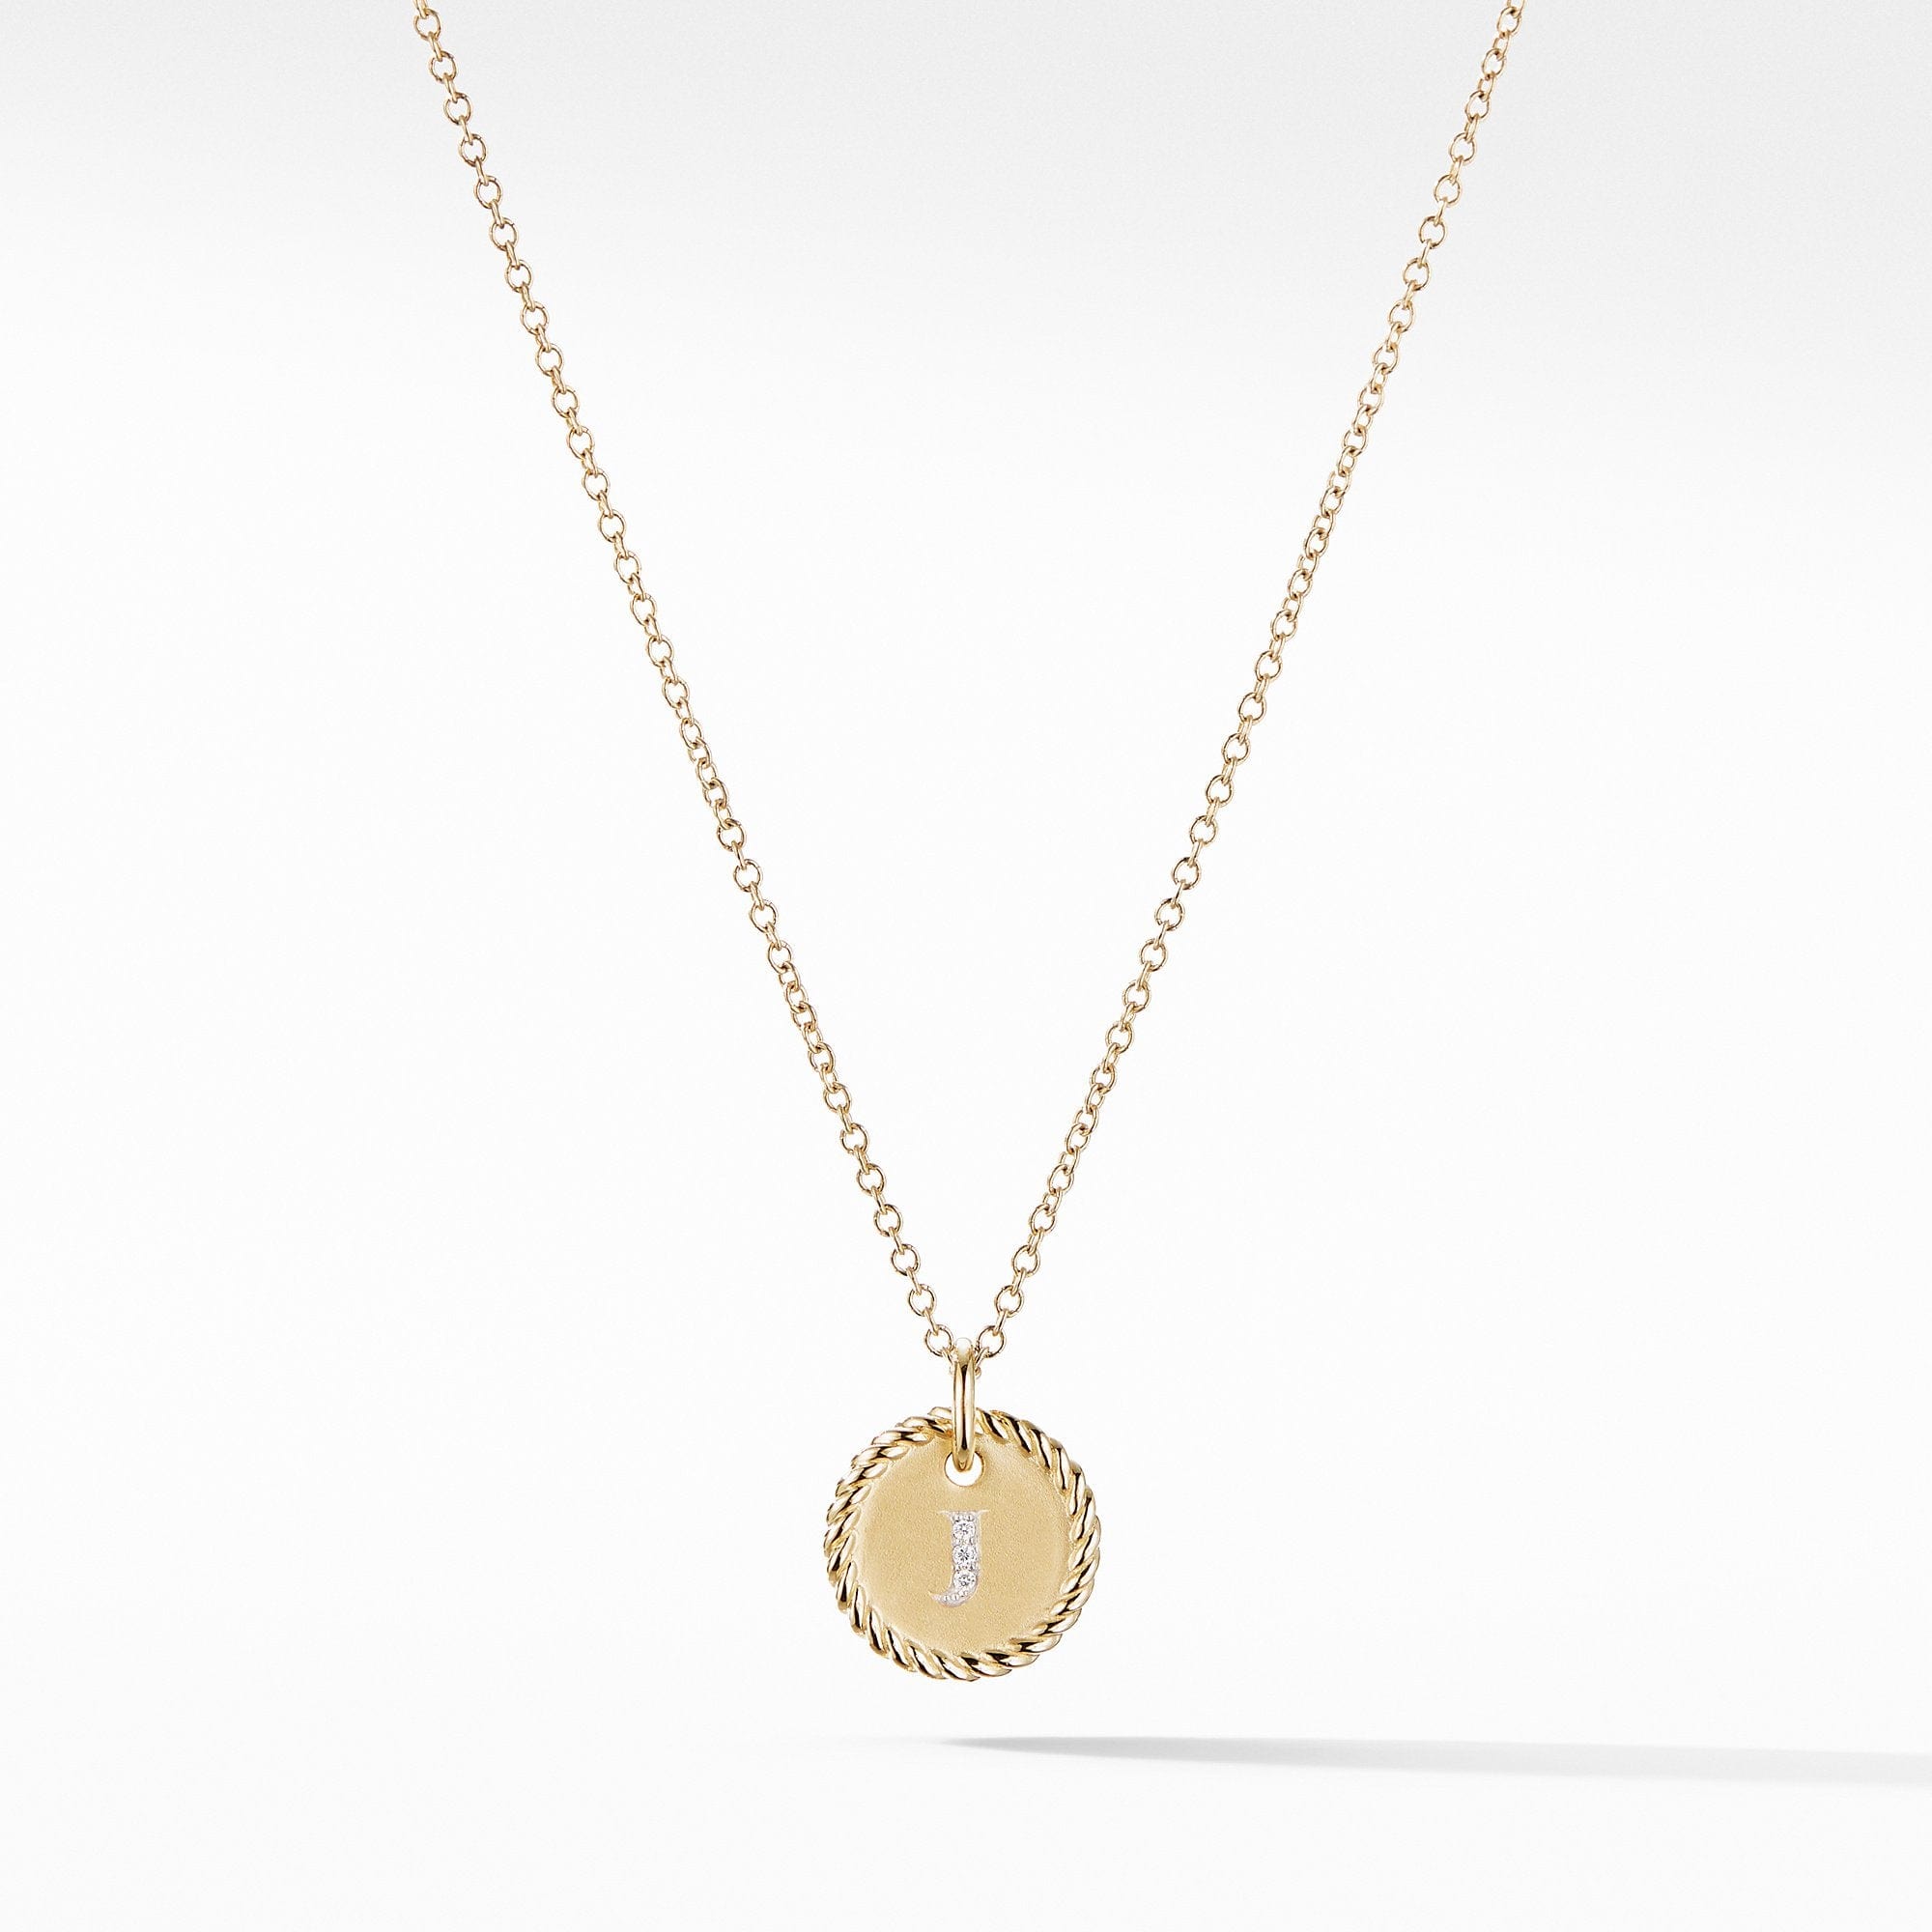 "J" Pendant with Diamonds in Gold on Chain